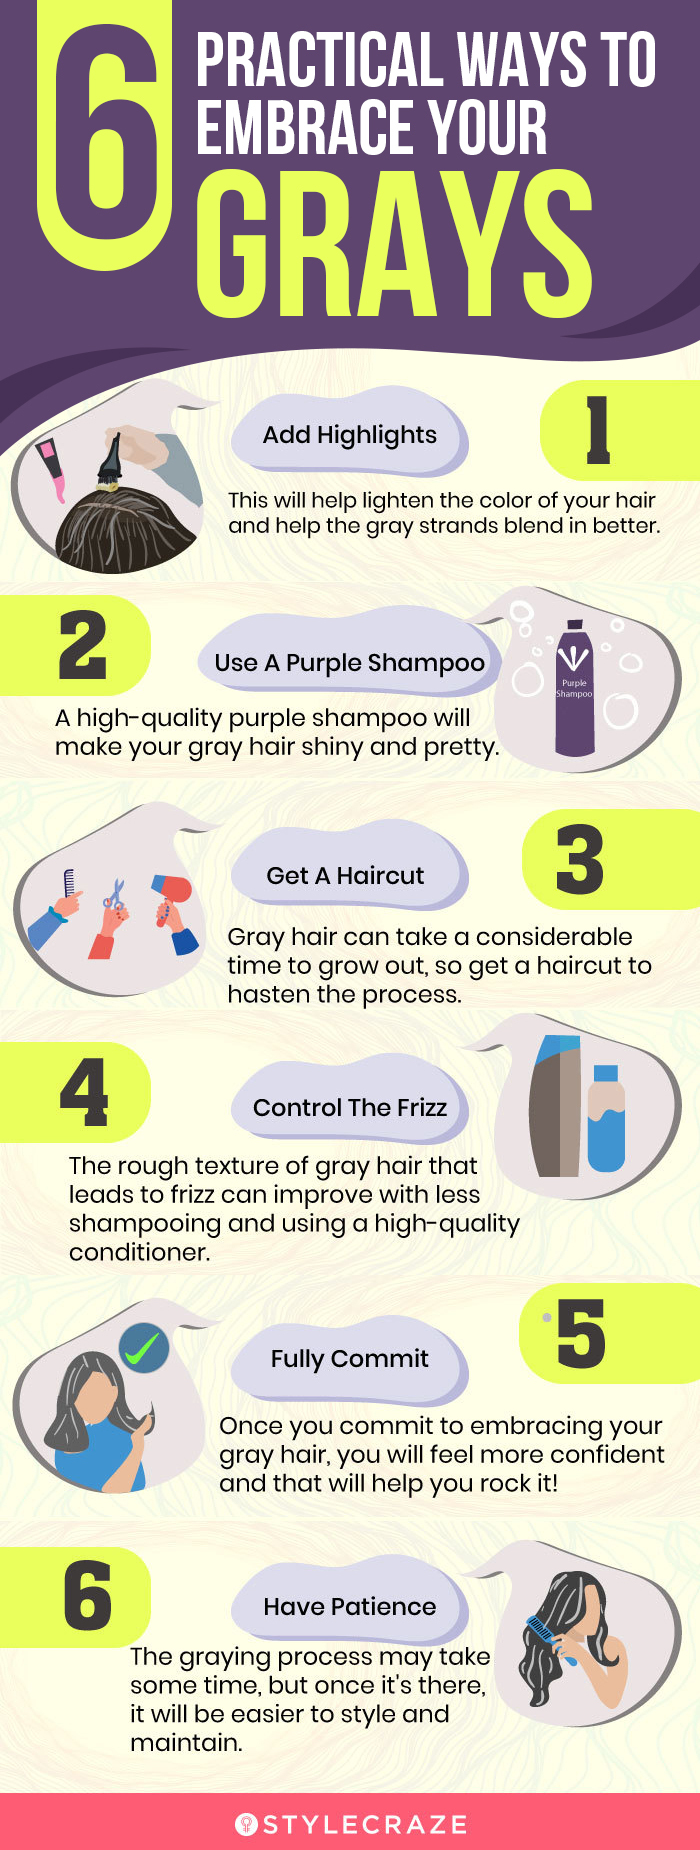 6 practical ways to embrace your grays (infographic)